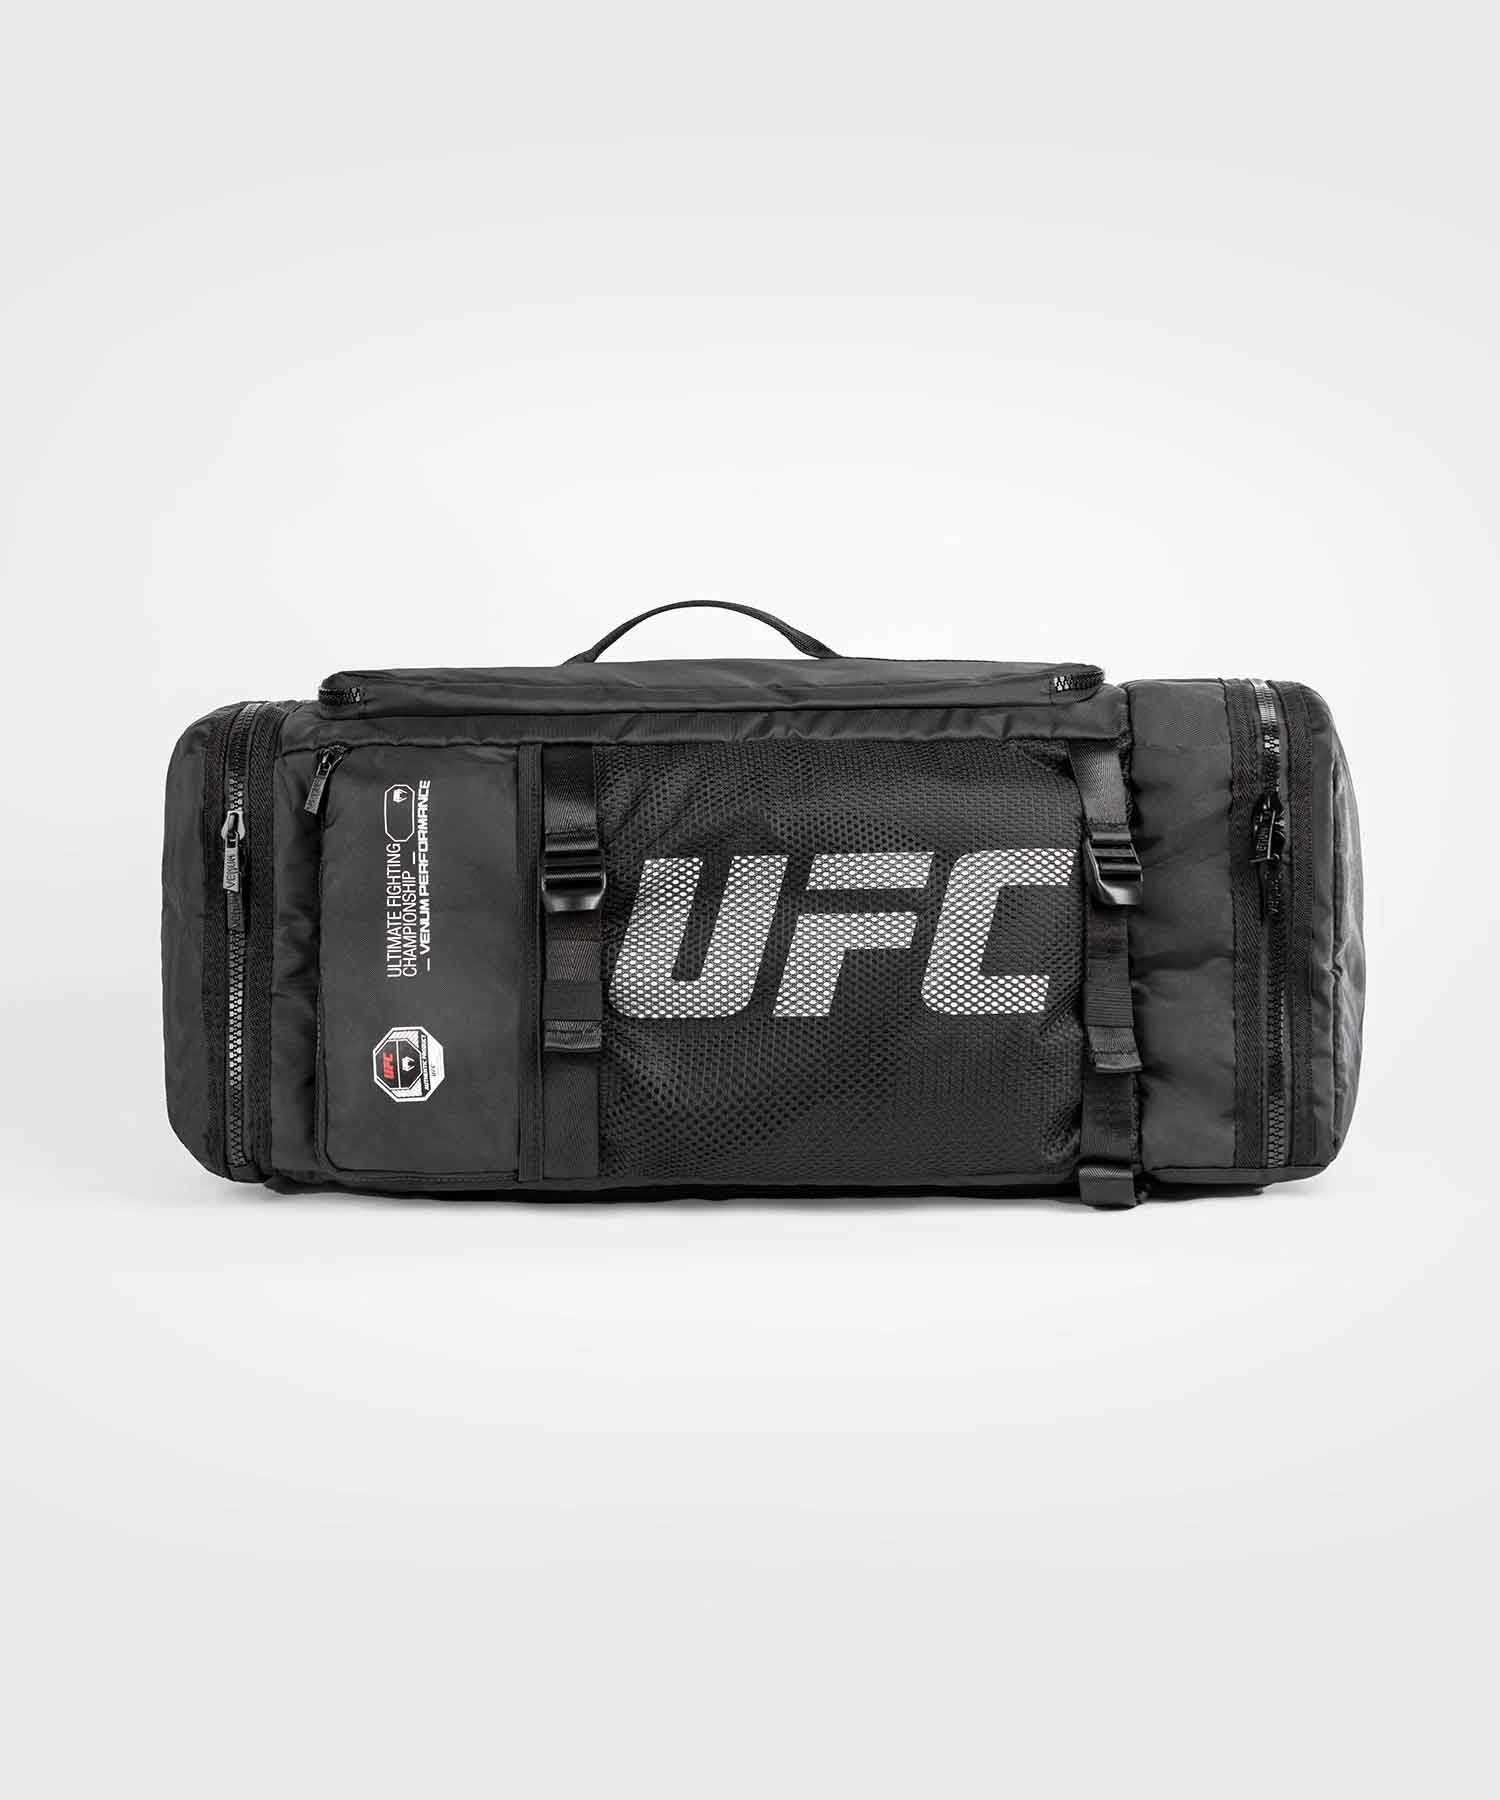 UFC Adrenaline by Venum Fight Week Duffle Bag／UFC アドレナリン by ヴェナム ファイトウィーク ダッフルバッグ